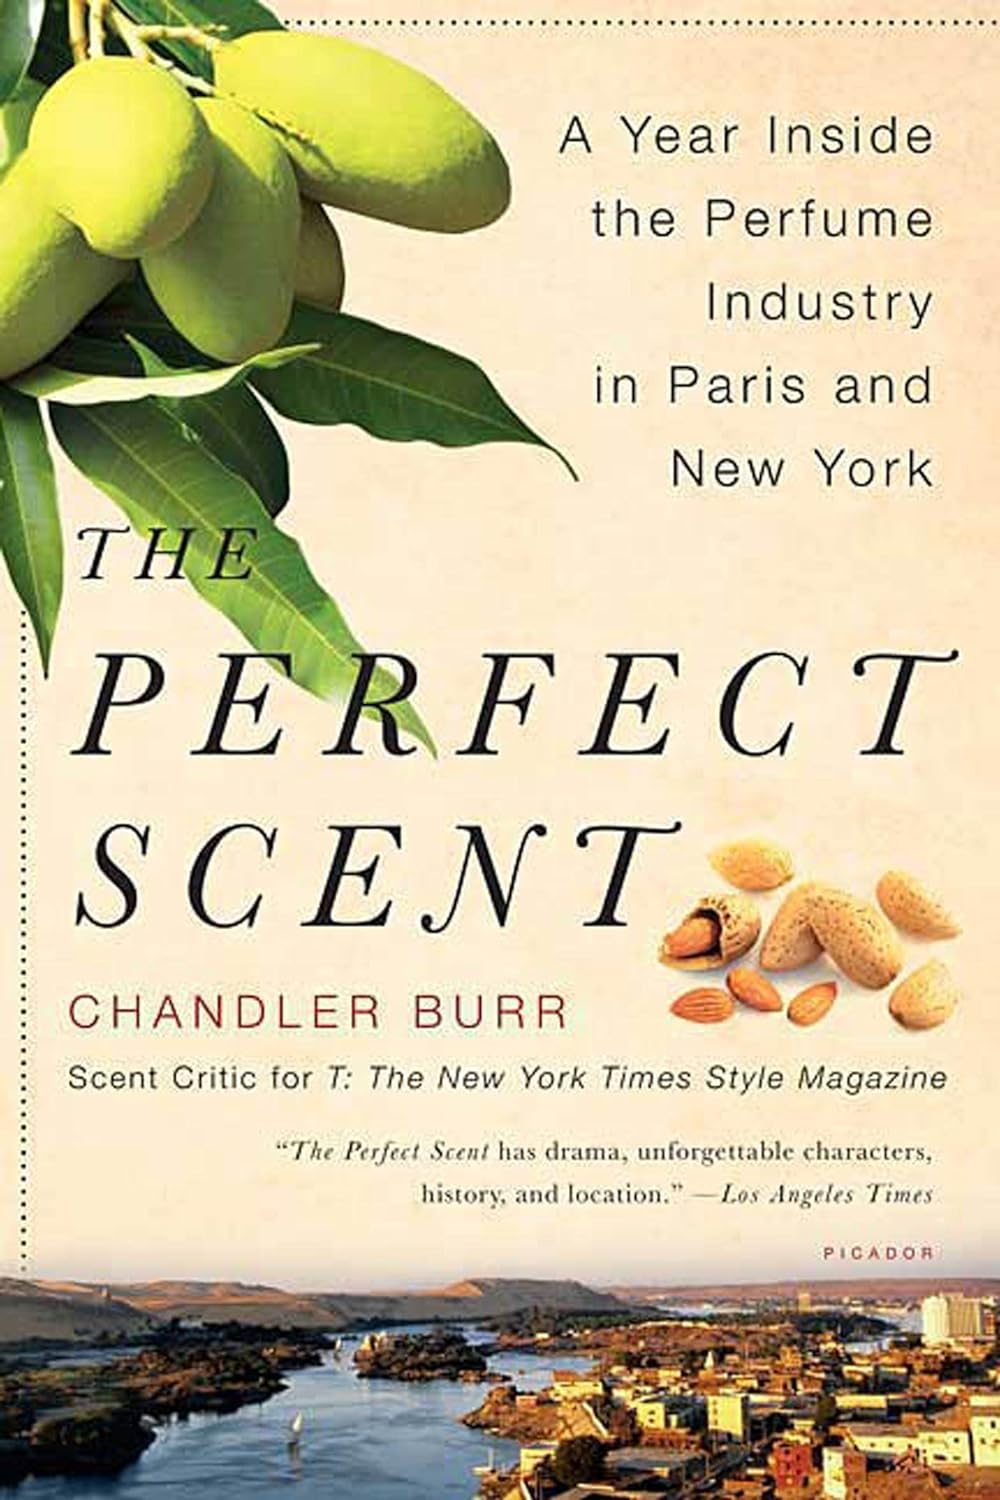 Books about Perfumery6